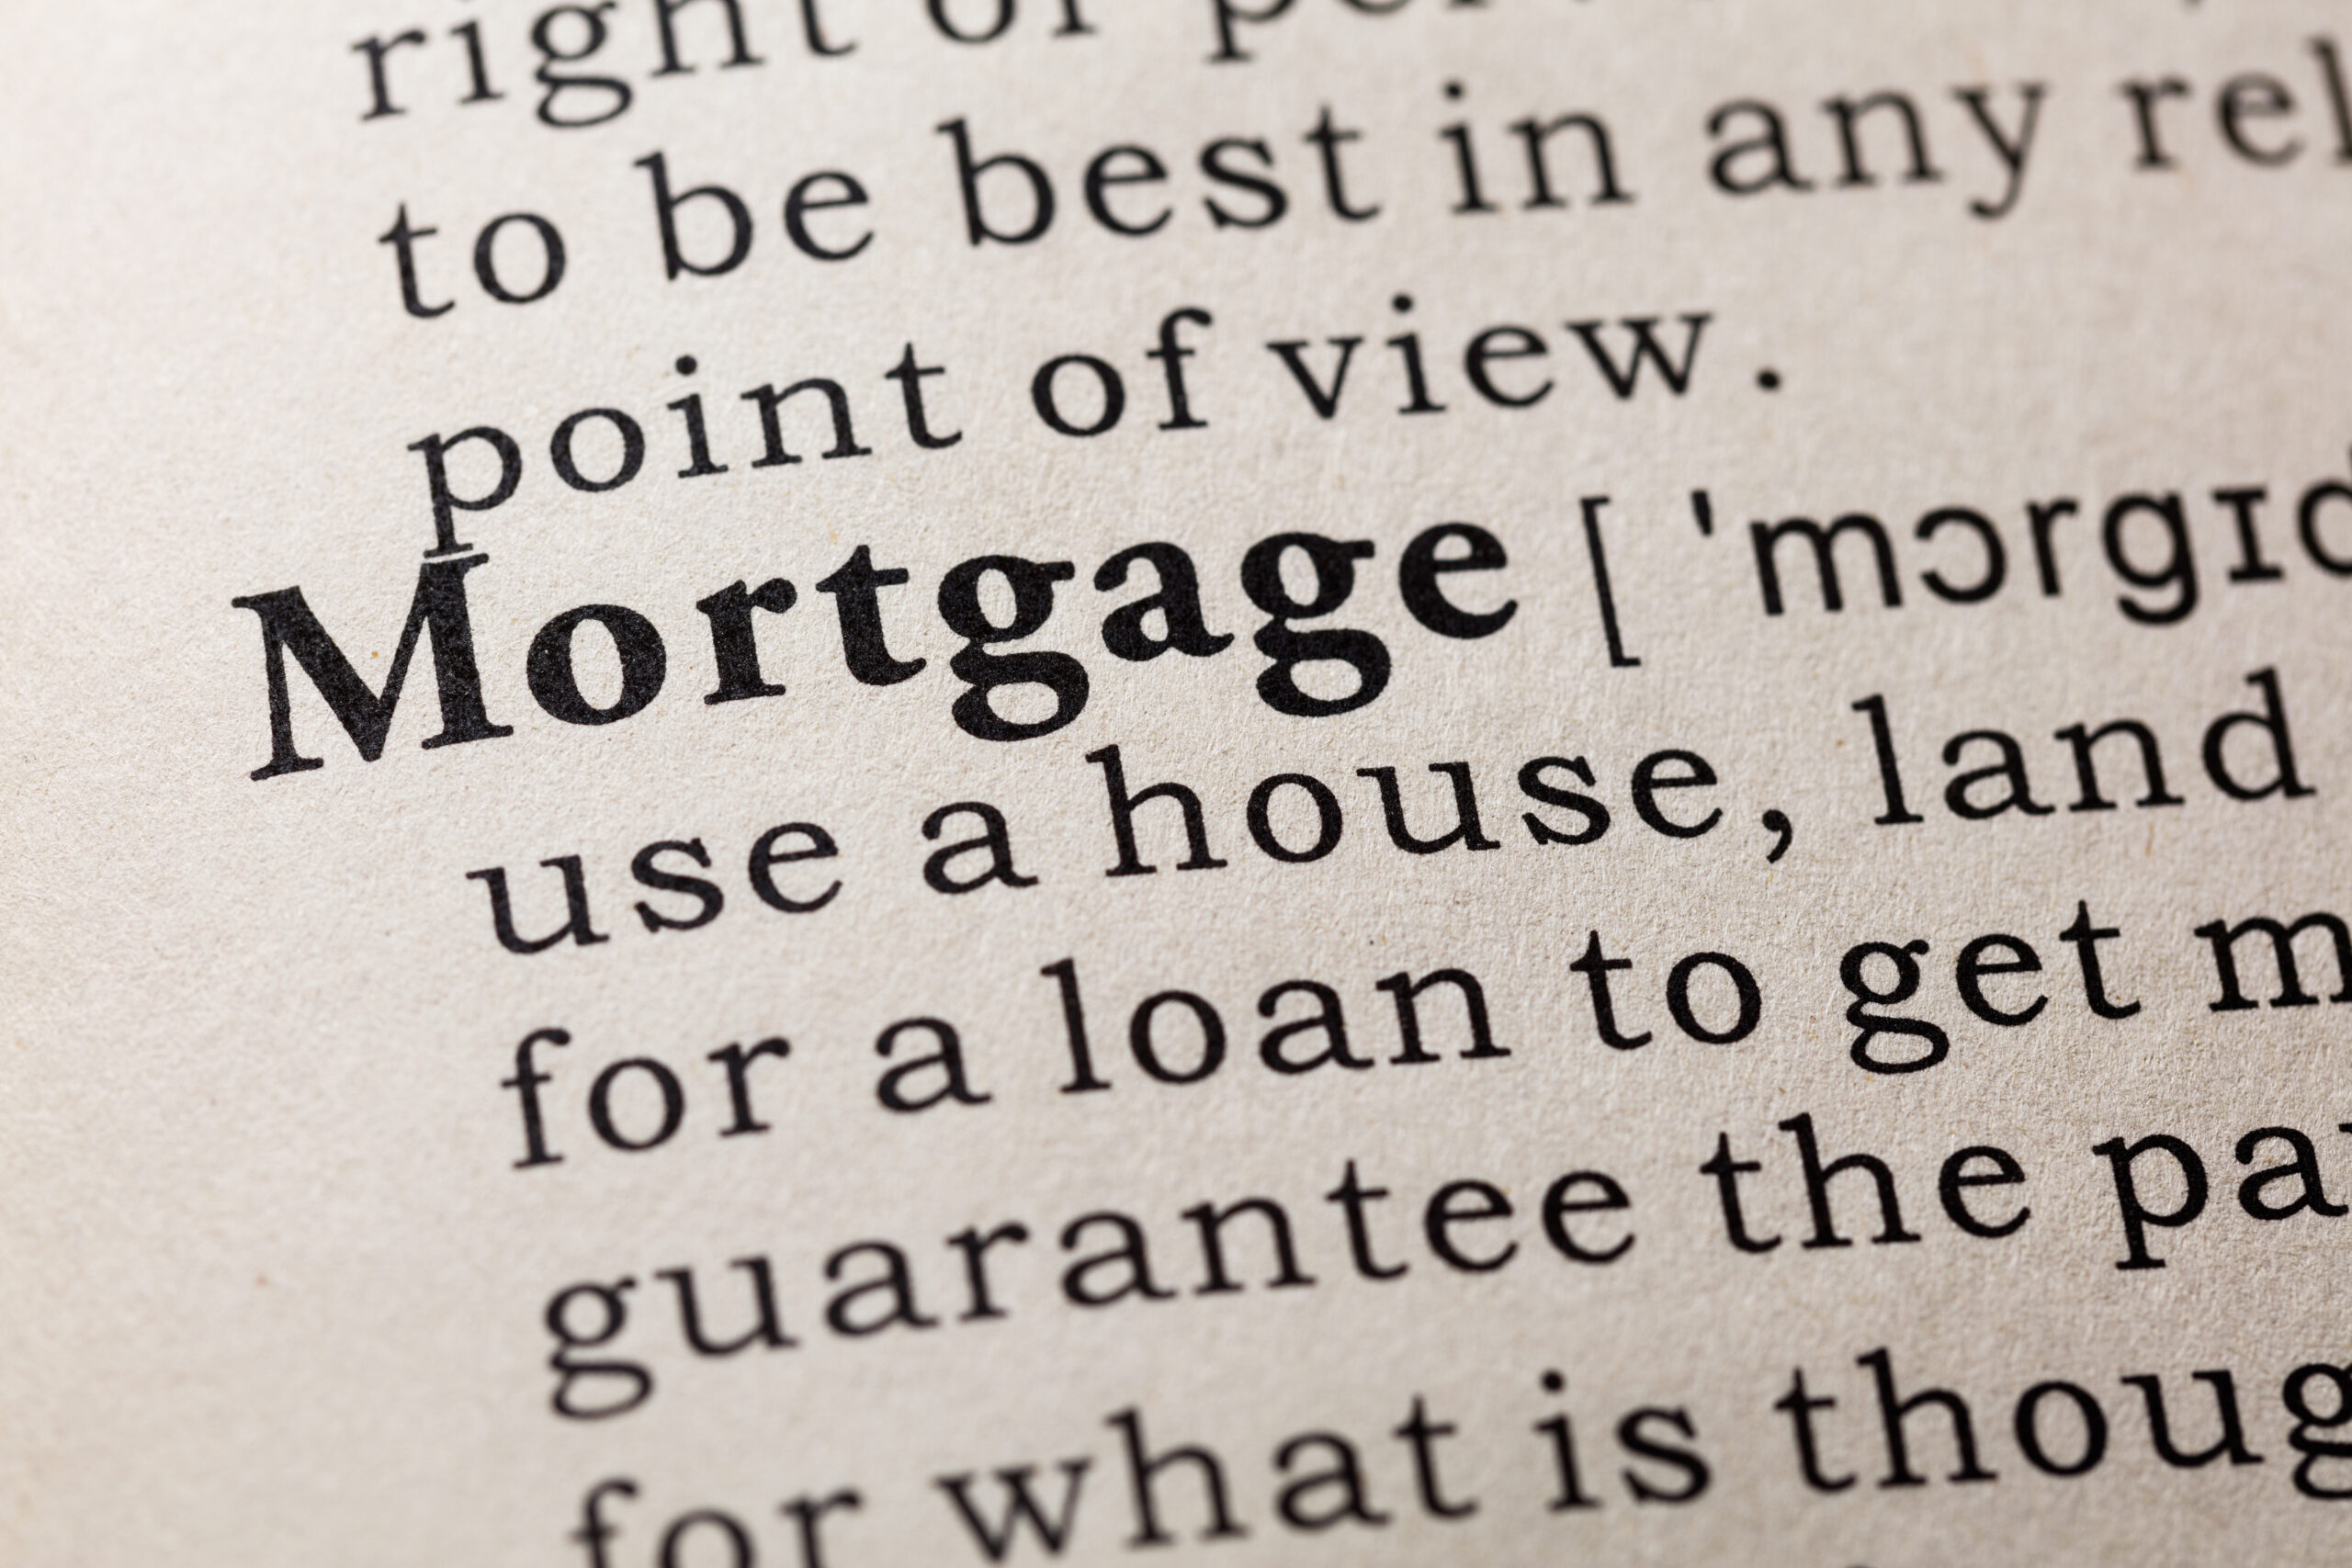 Black text appears on a white background. The image shows just a clip, but it seems it is a page from dictionary. The word "mortgage" appears in bold, with additional text that is not shown in whole.